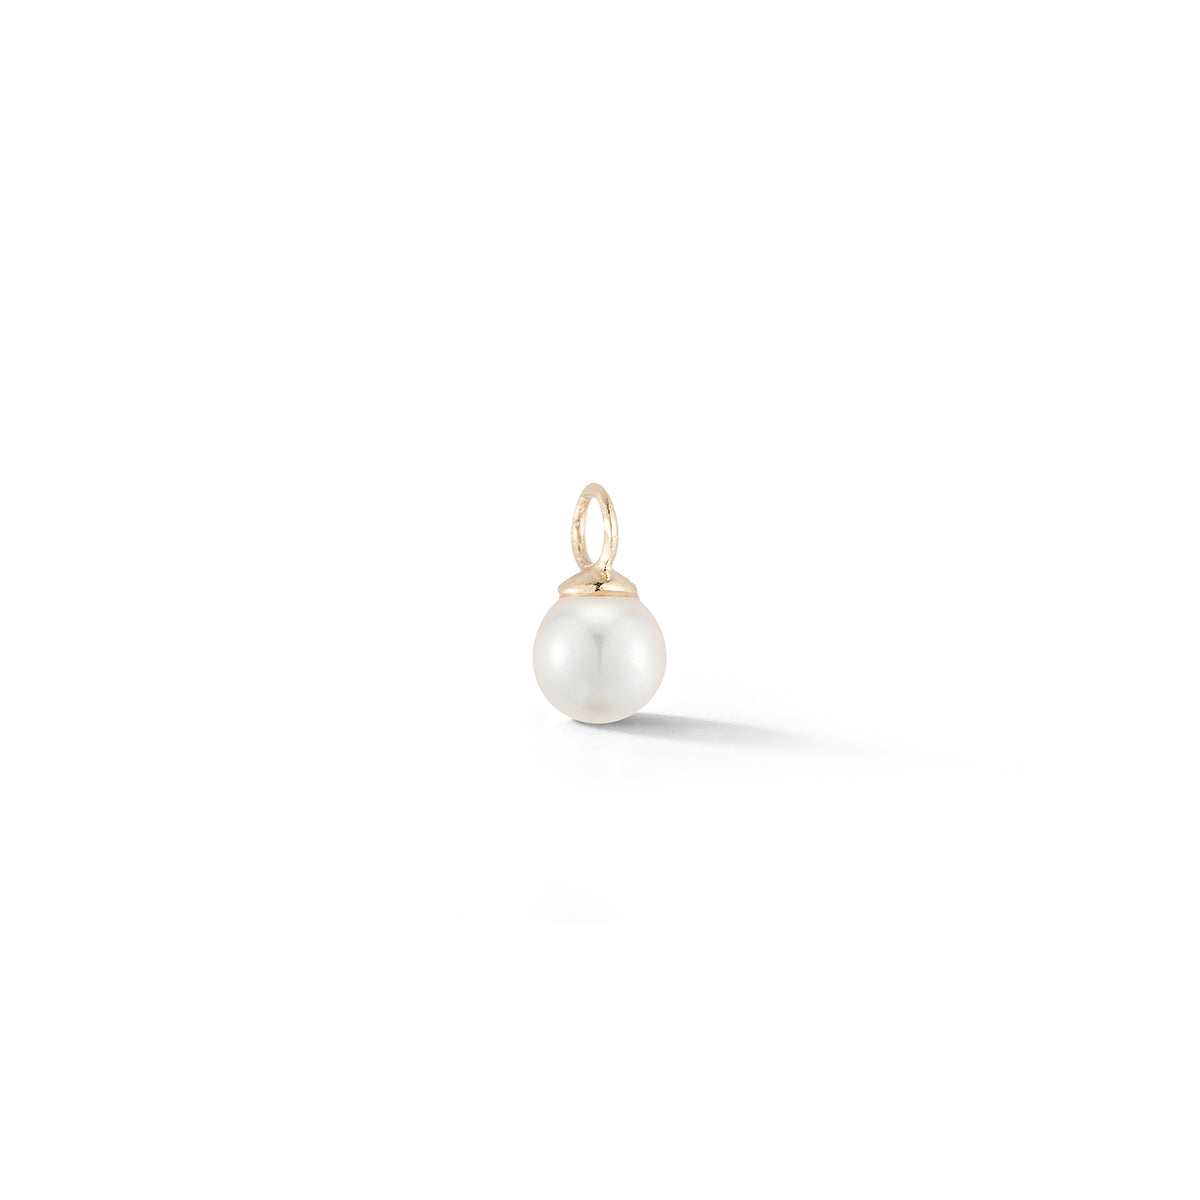 White Pearl Charm, 14K Gold Filled Crystal Pearl Charm, 5mm Pearl Hooplet,  Gold Ball Charm, Gold Earring Charms, Gold Charms, KL20-1024 